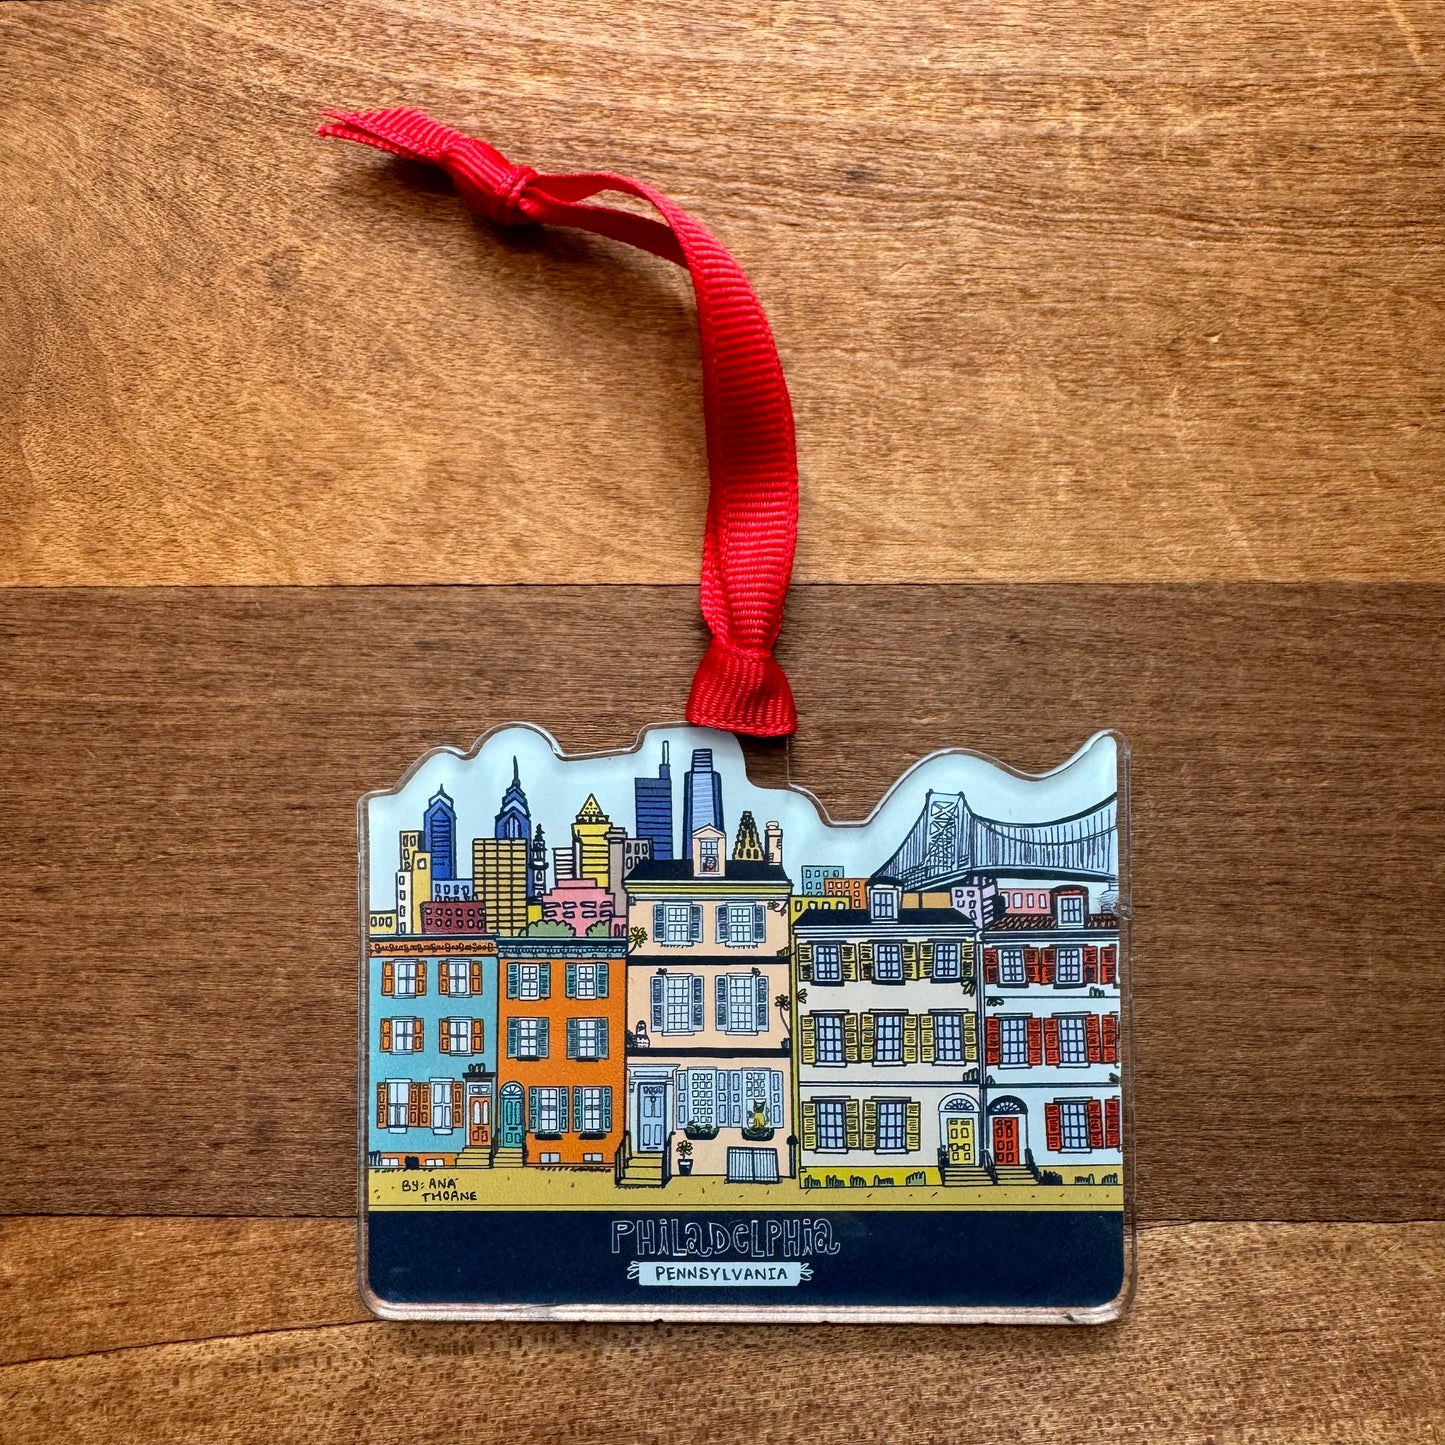 The Philly Acrylic Ornaments by Ana Thorne embody true Philly pride, showcasing a Philly Rowhome, city buildings, and a bridge. Each ornament comes with a red ribbon for hanging.